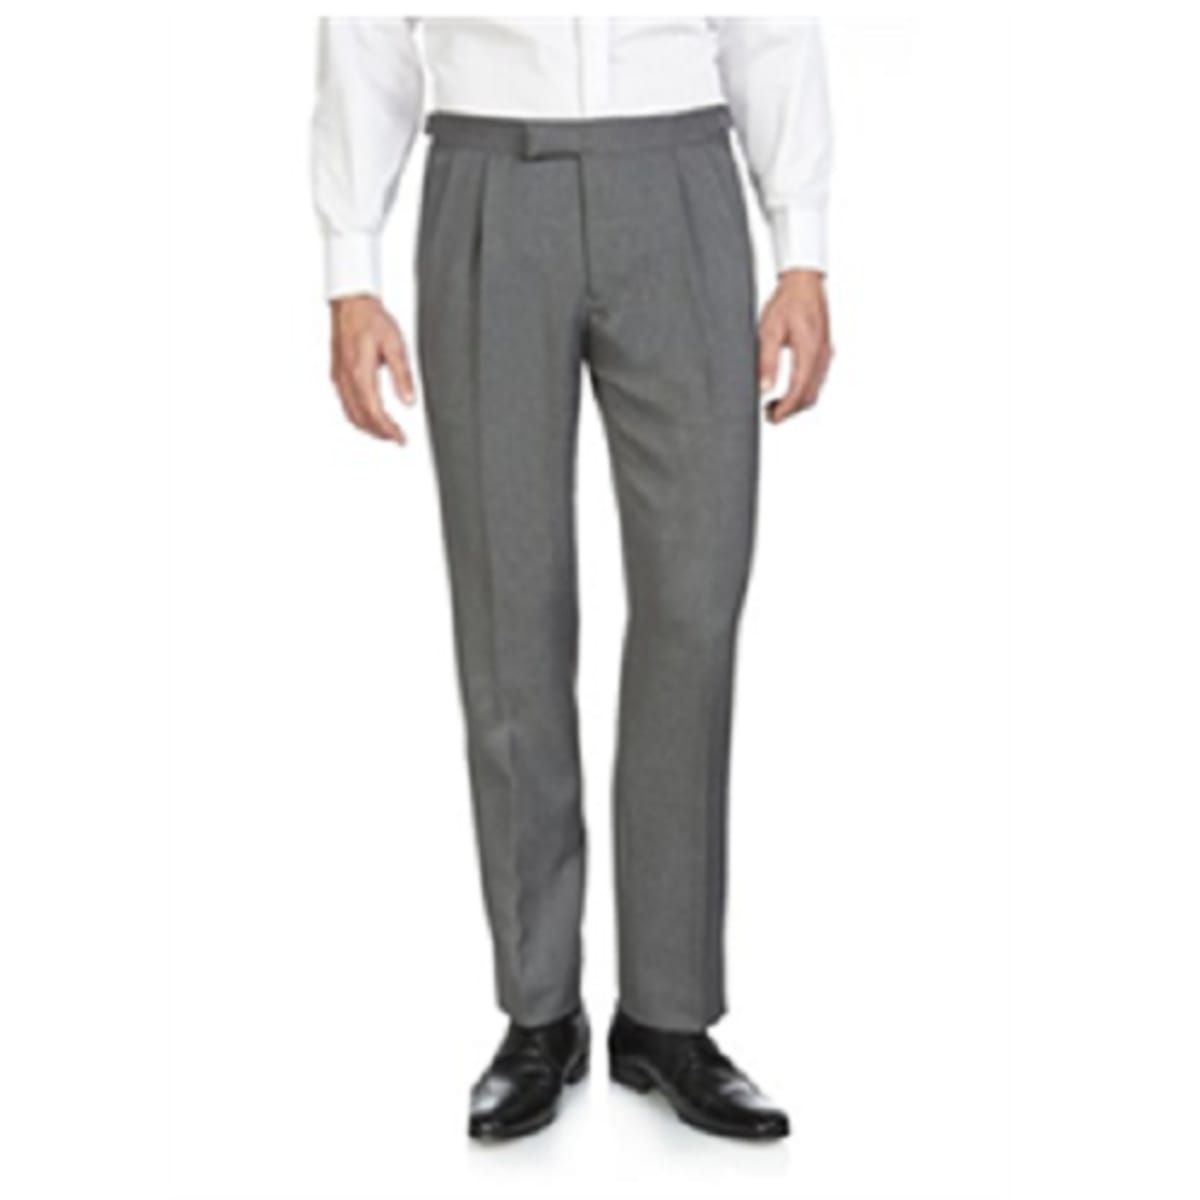 Morning Trousers  ExHire Morning Suit Trousers  Tweedmans